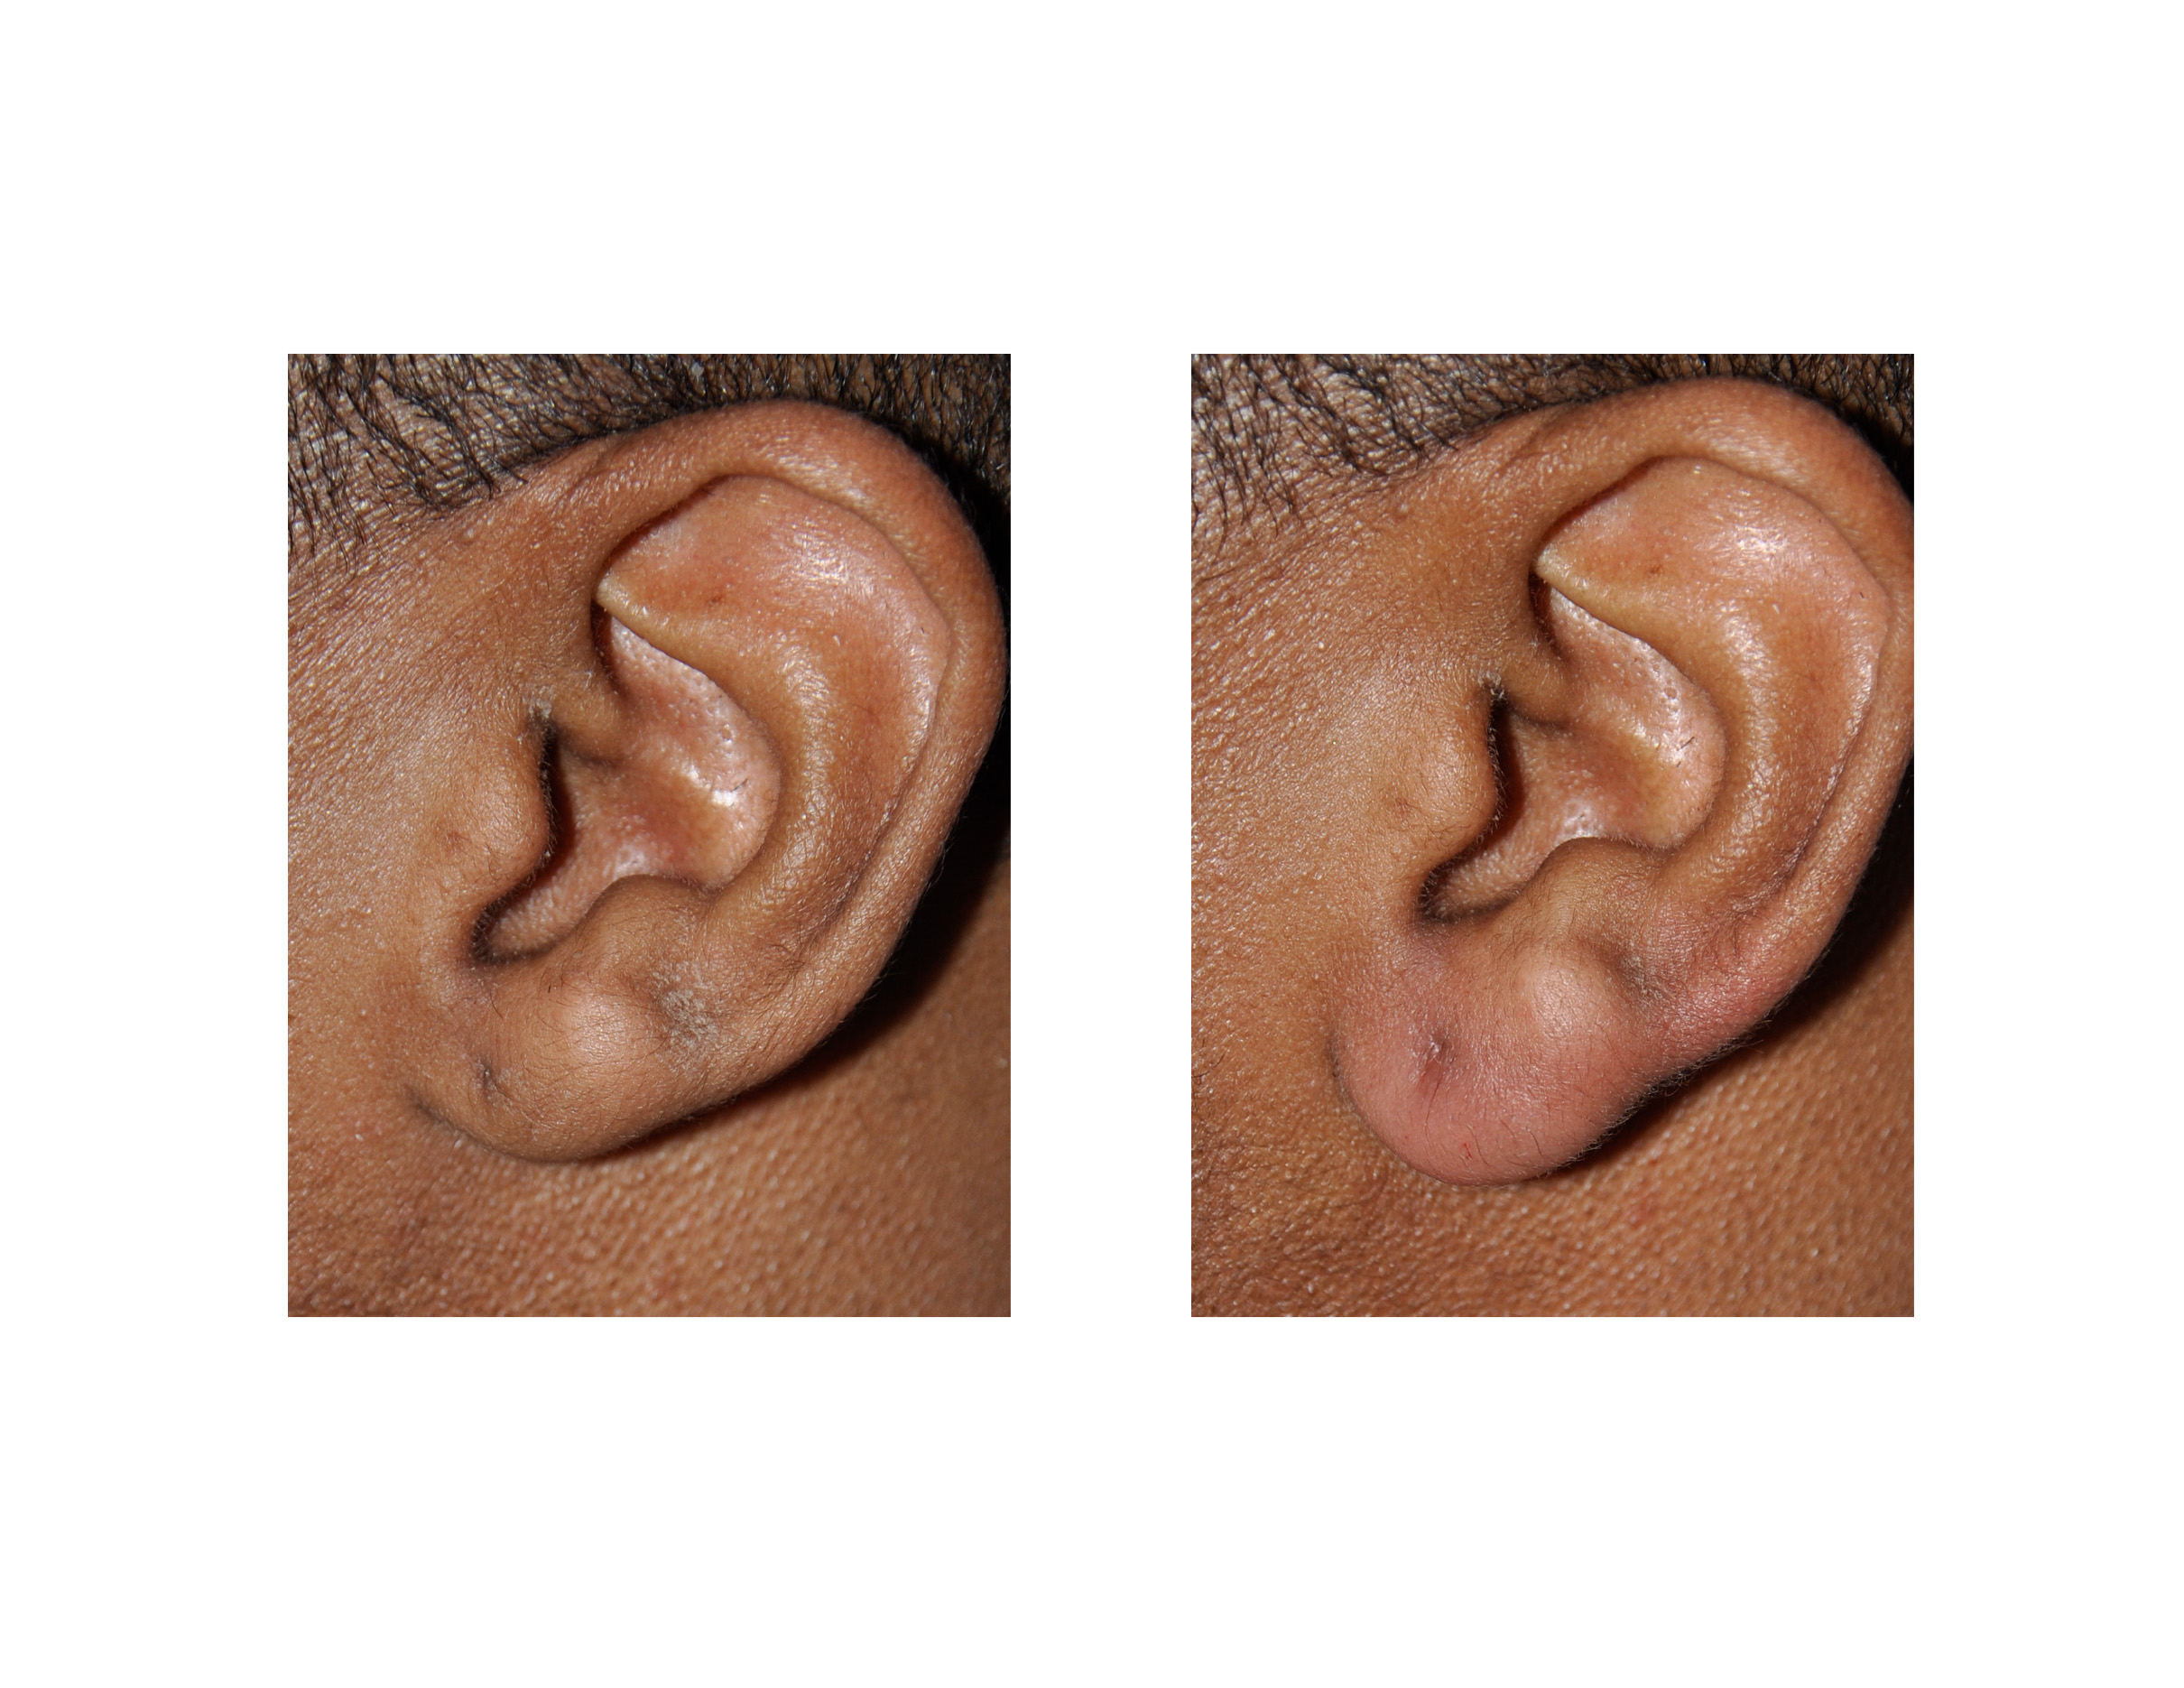 Earlobe Enlargement by Injectable Fillers Dr Barry Eppley Indianapolis